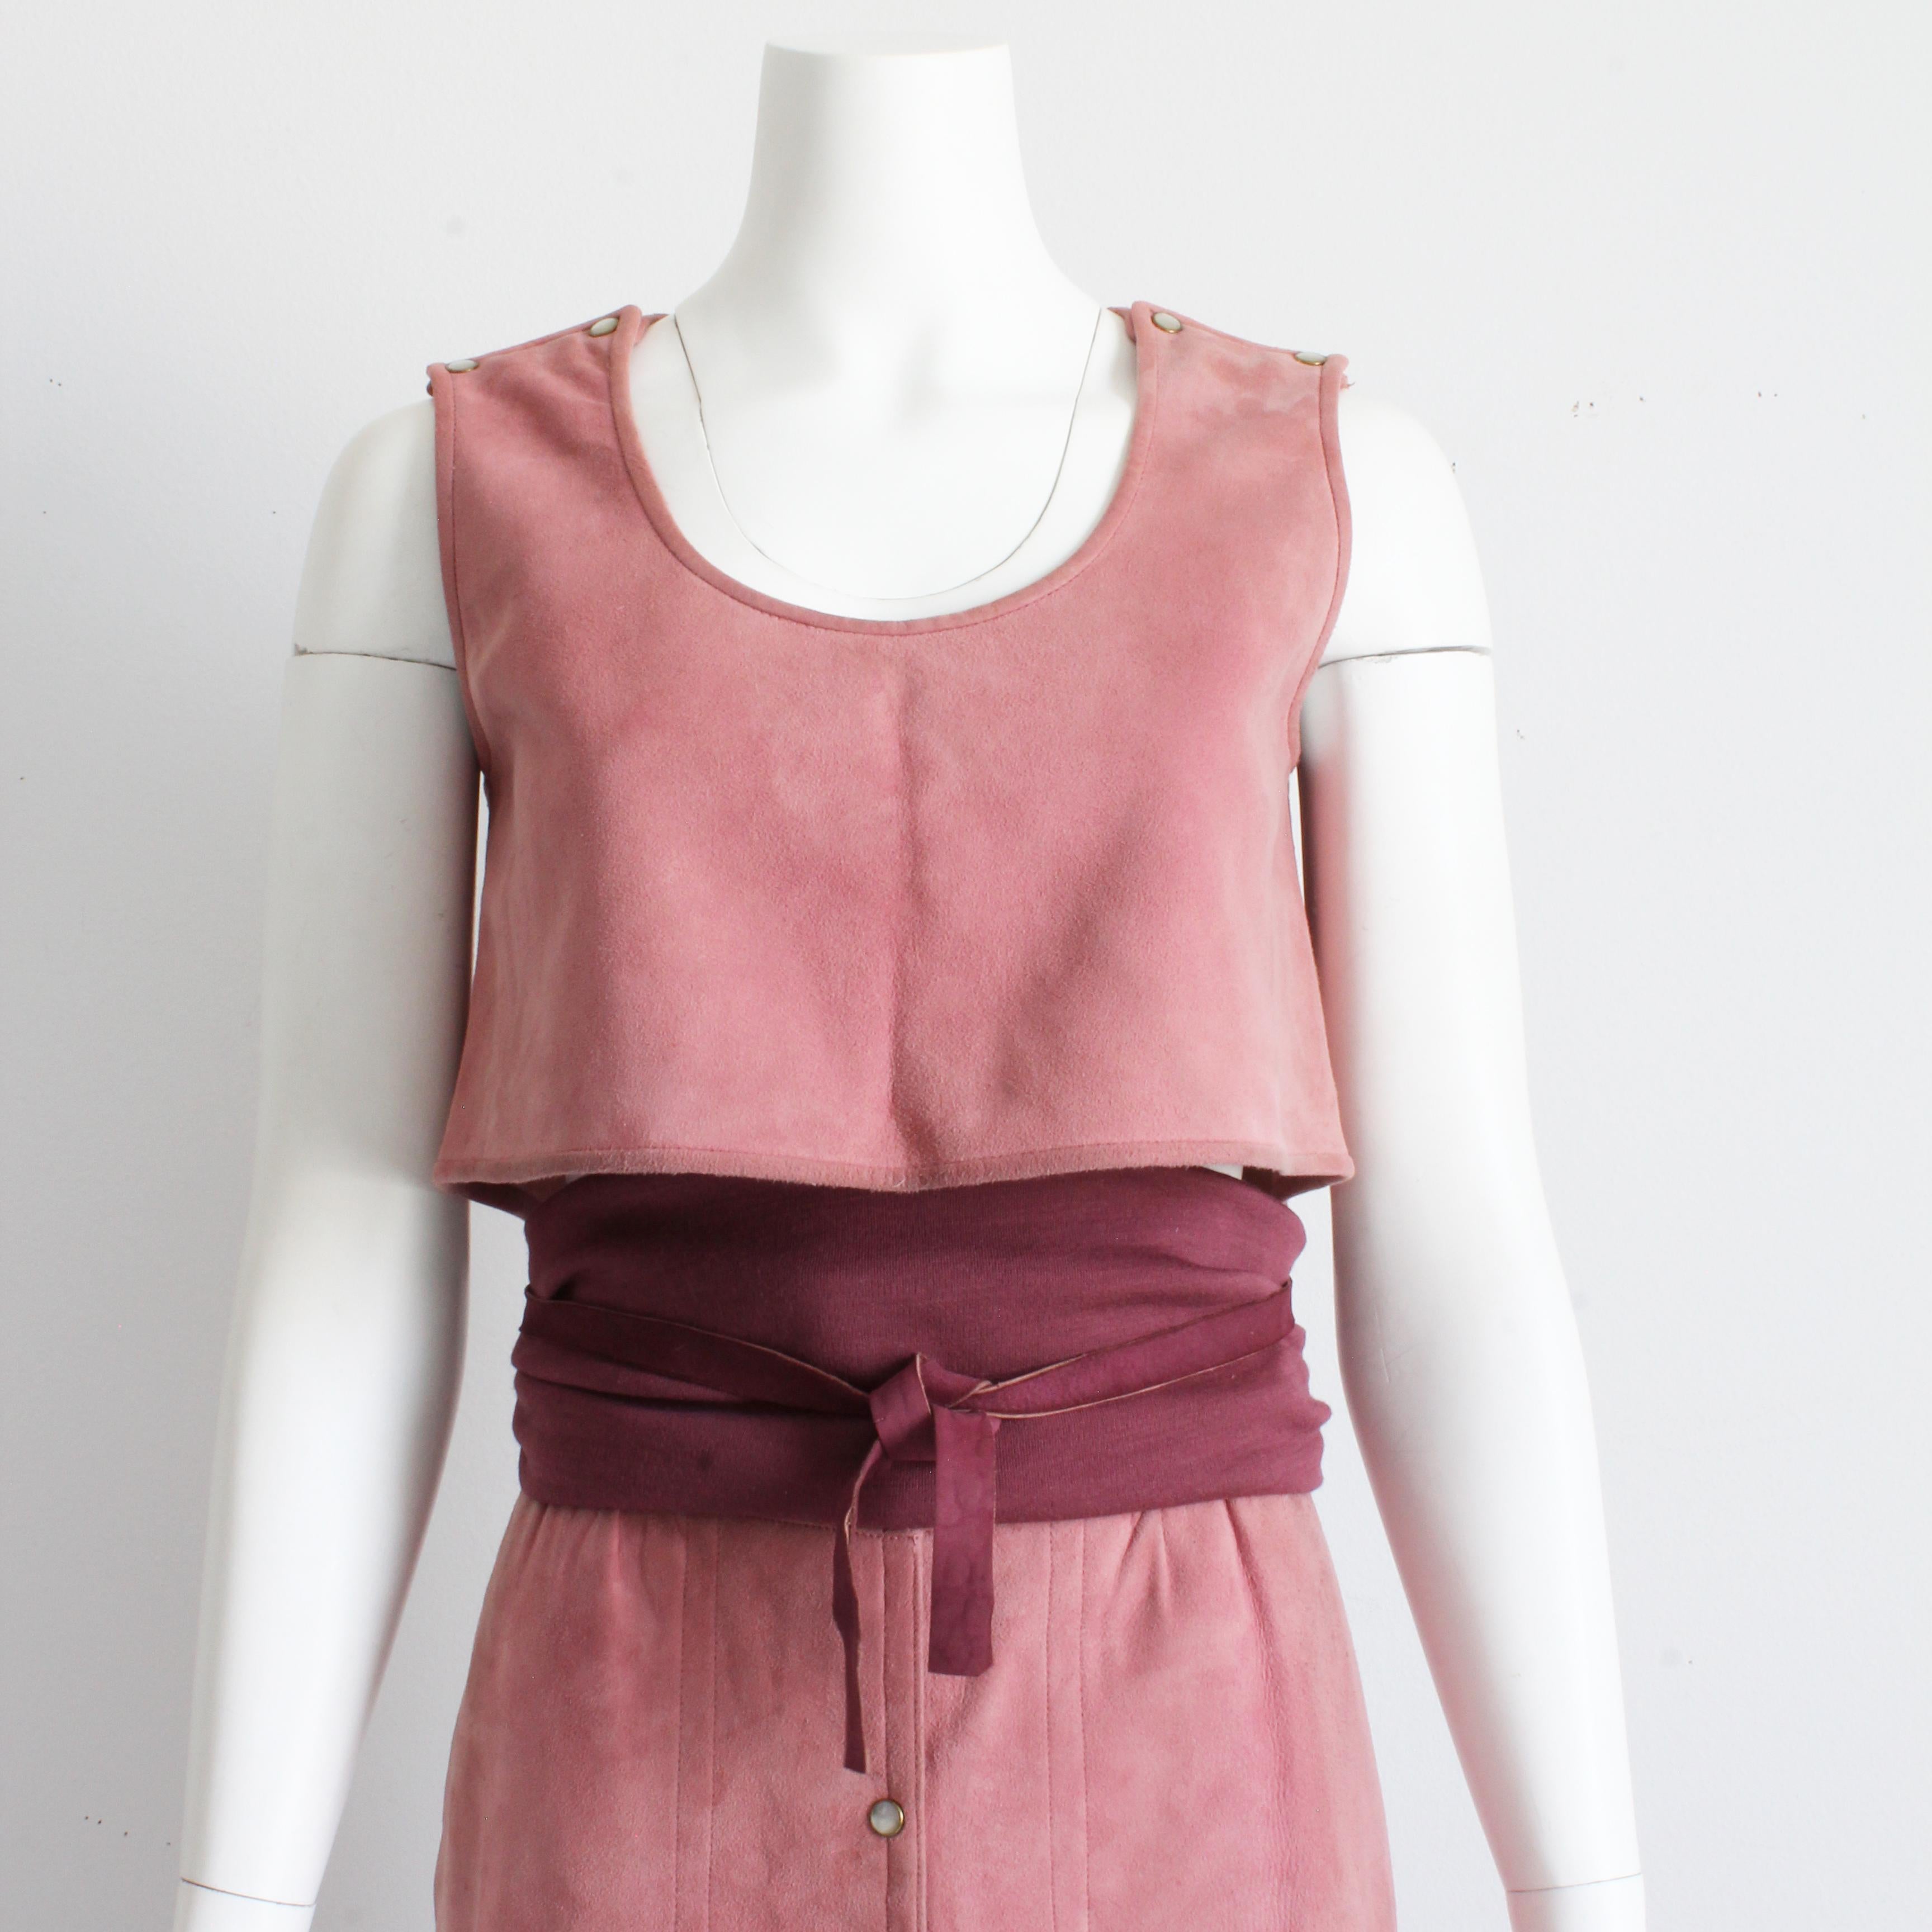 Bonnie Cashin for Sills Pale Pink Suede Skirt Set 3pc Top Skirt and Belt Rare S For Sale 6